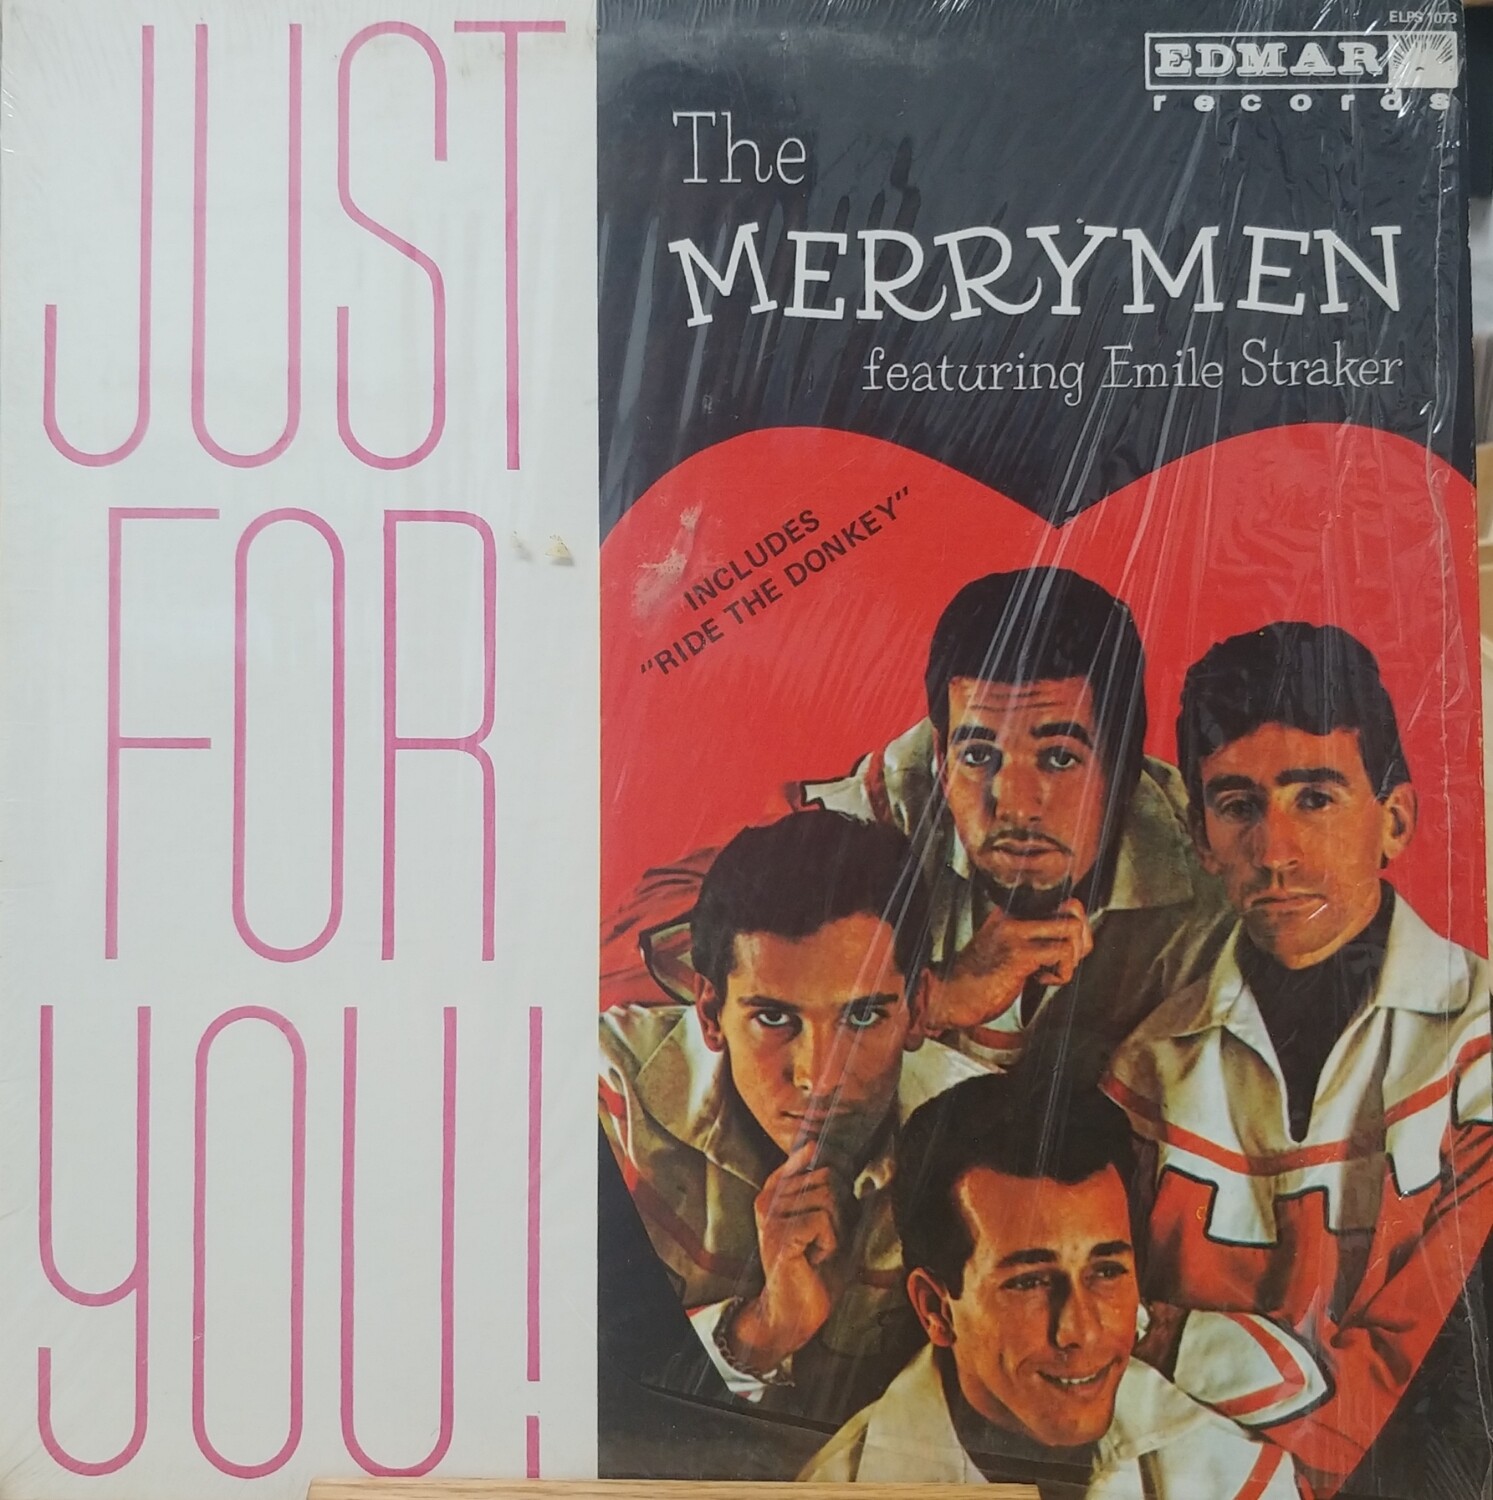 The Merrymen - Just for you